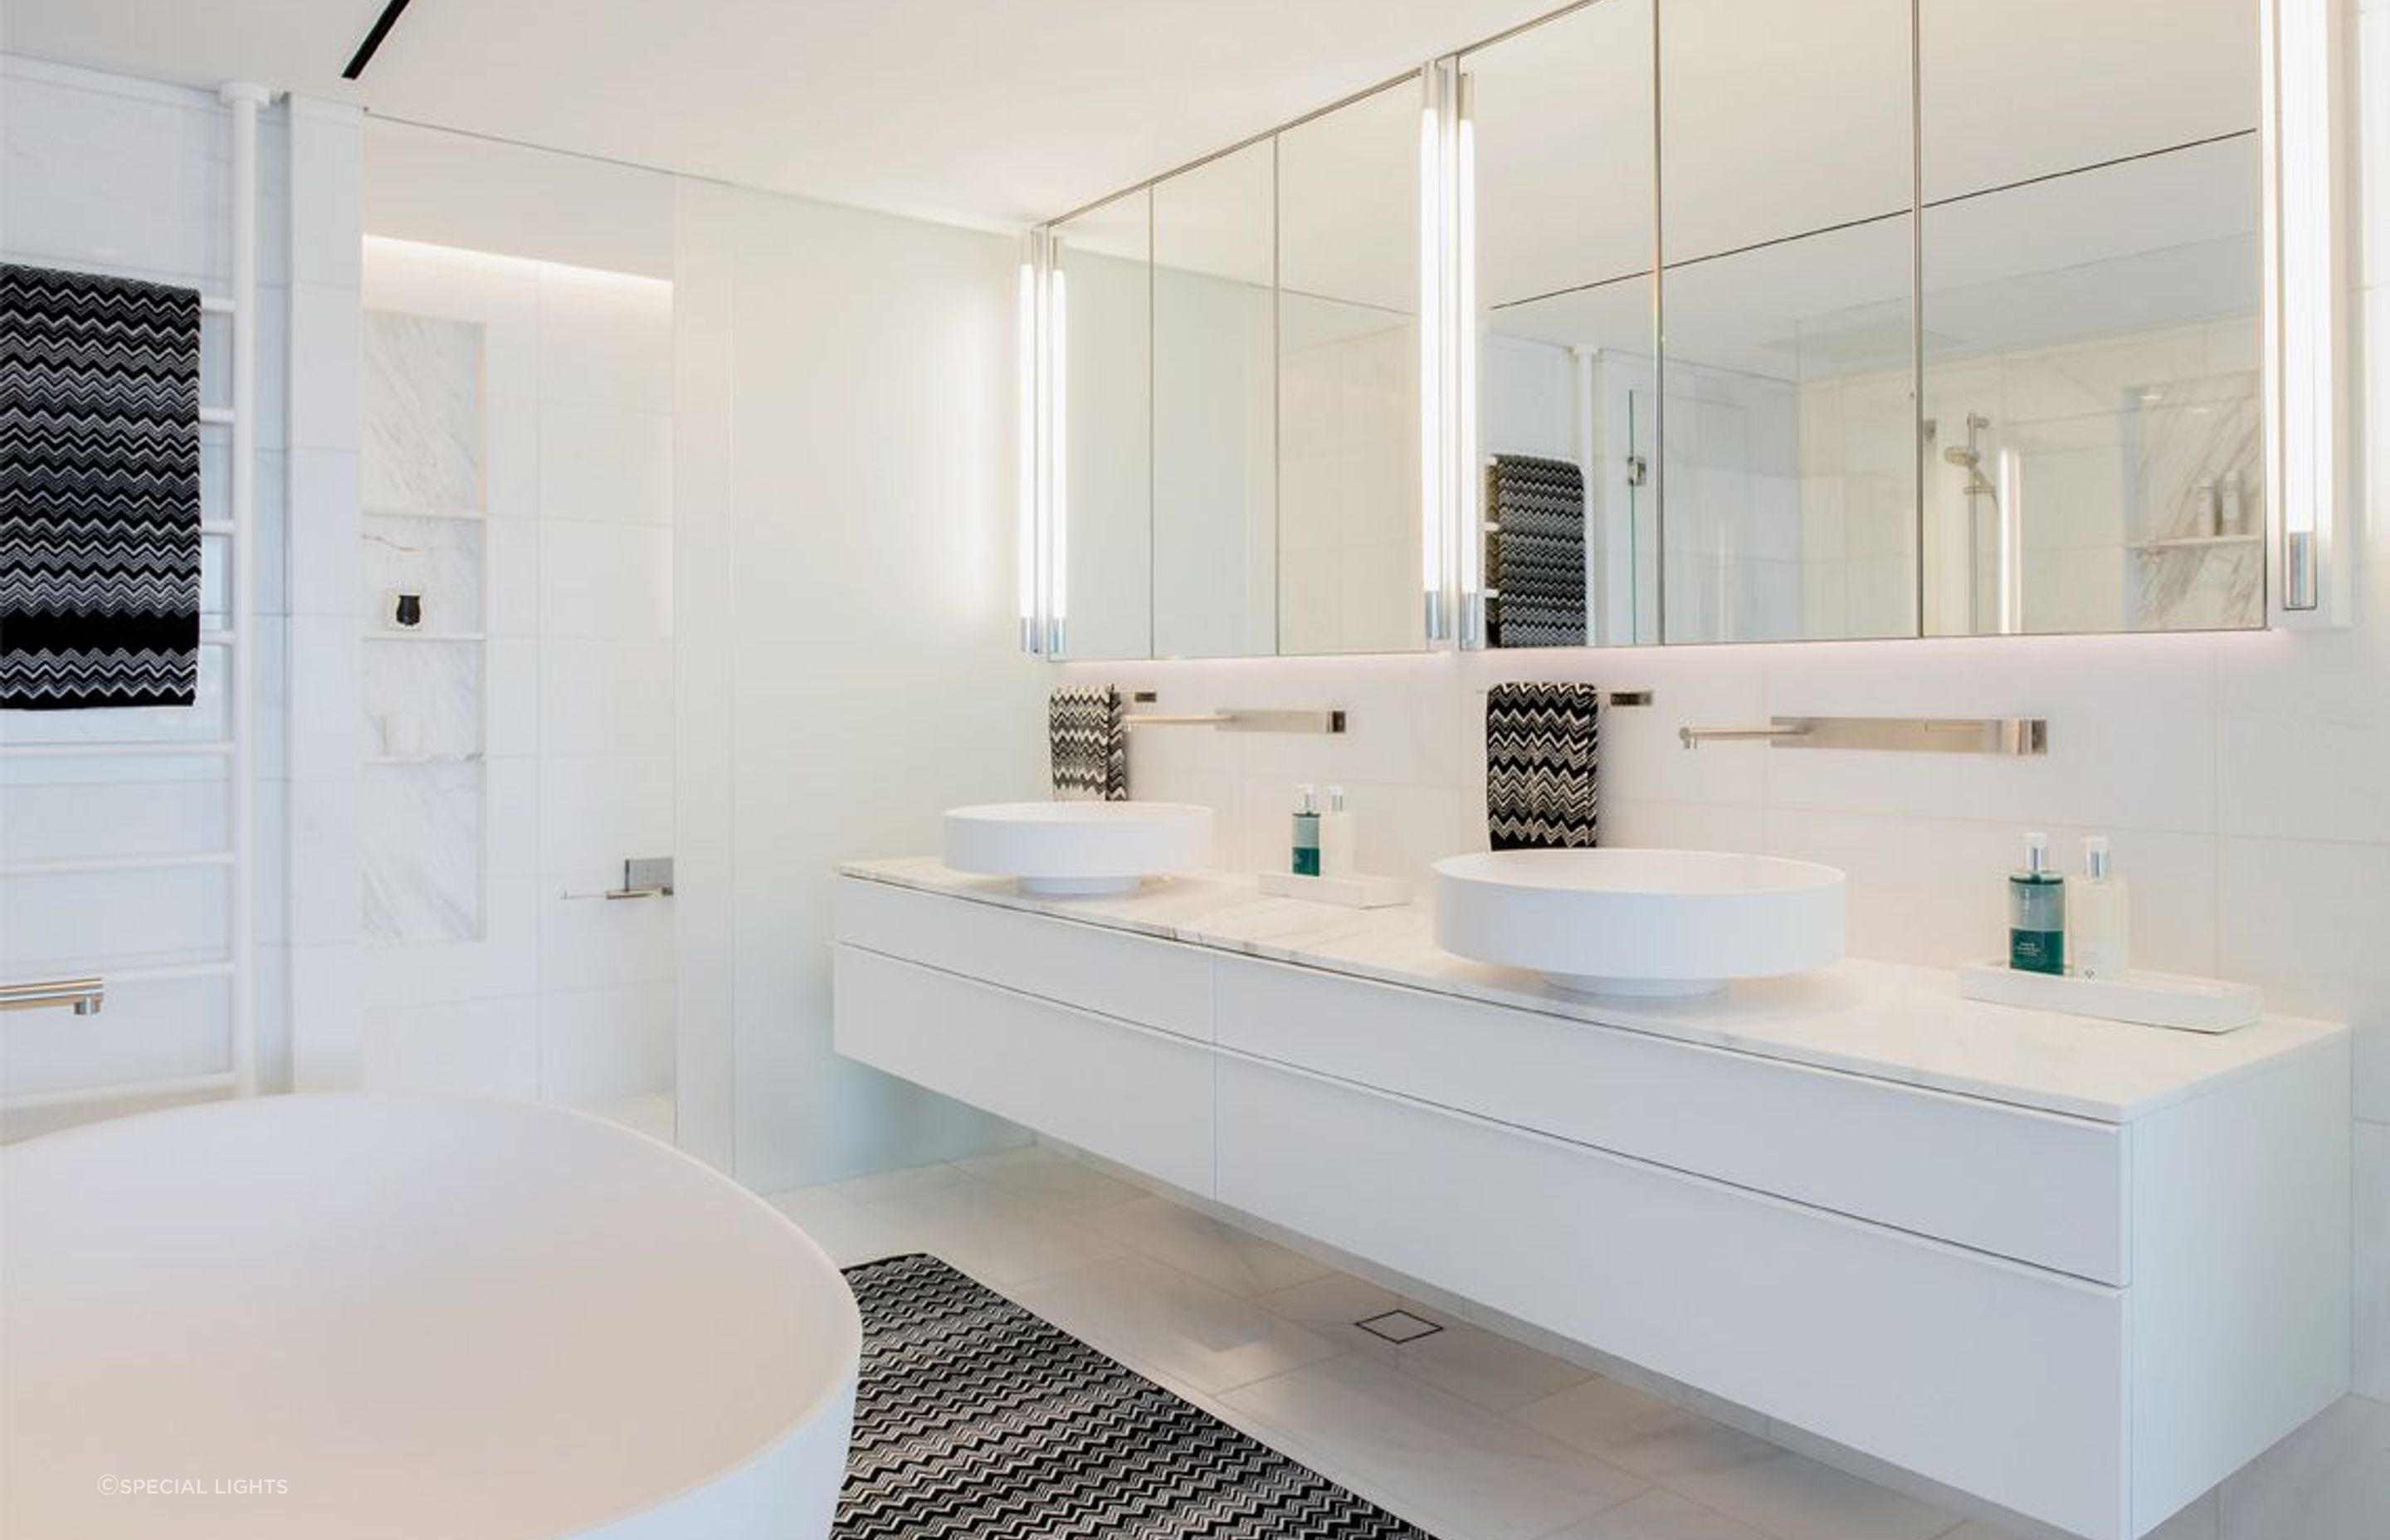 Only the essentials in this beautiful bathroom in Bondi - Photography: Thilo Pulch - Pulch Photography